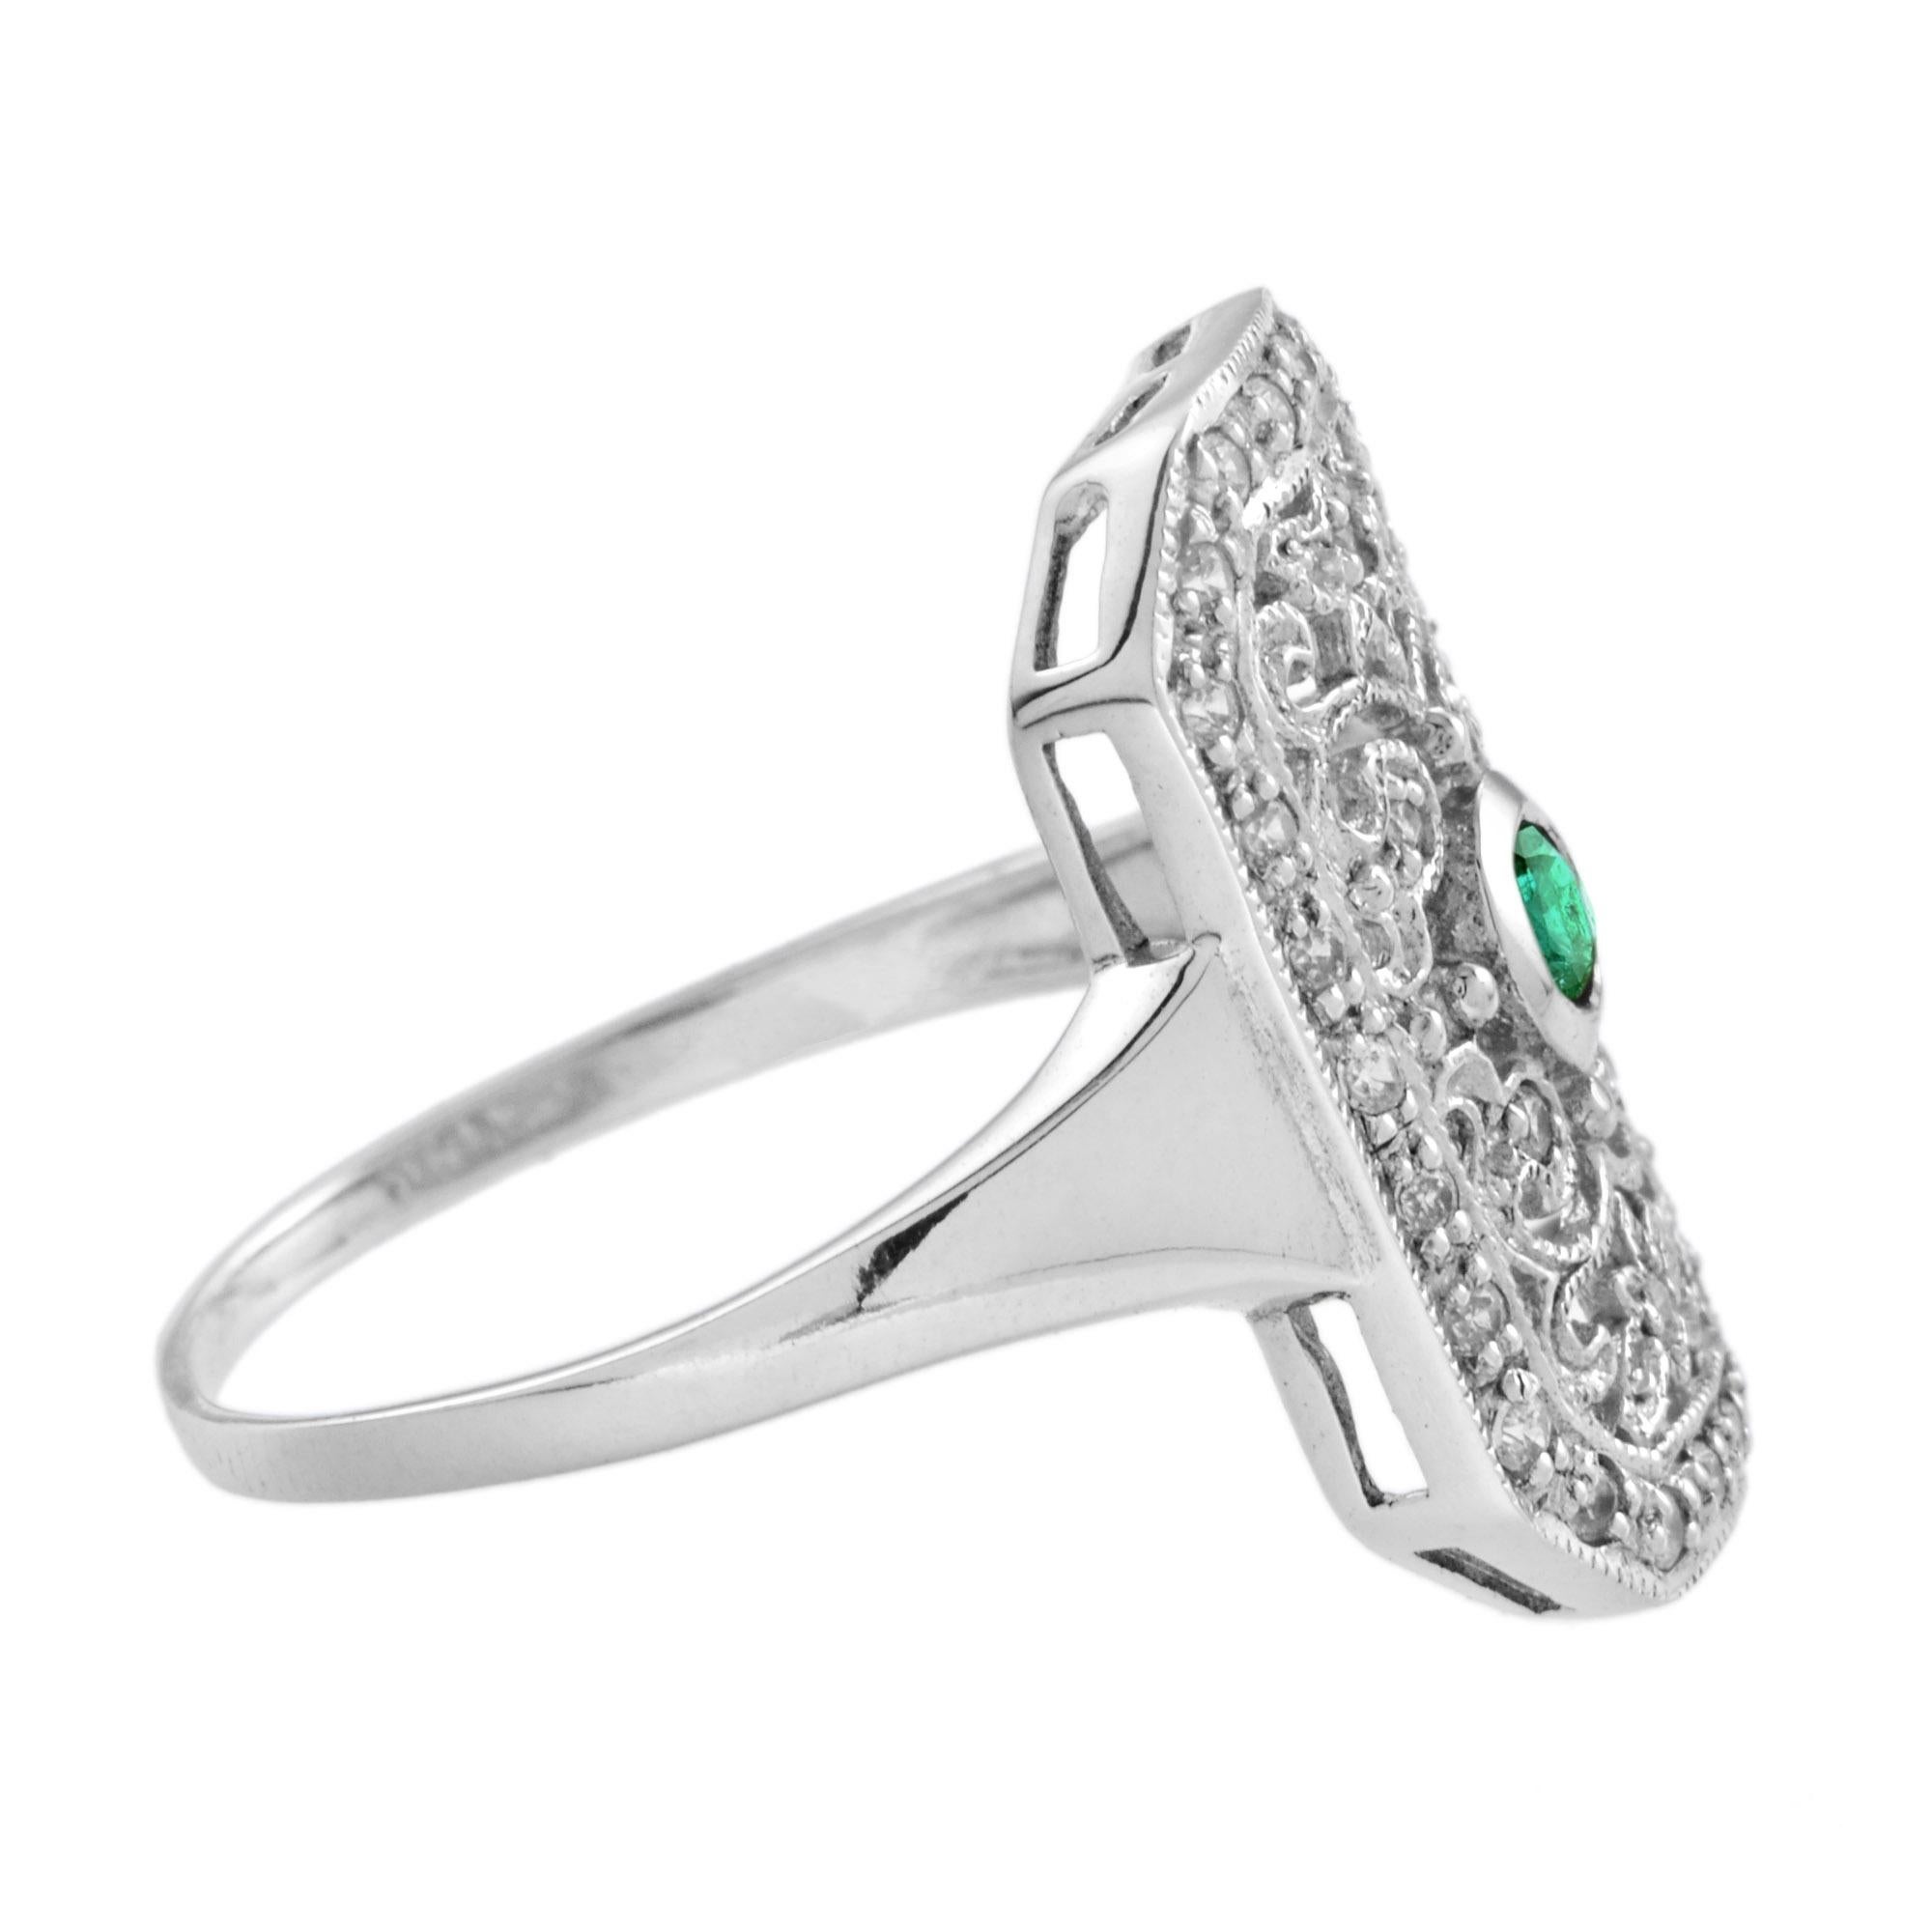 For Sale:  Emerald and Diamond Vintage Style Filigree Ring in 14K White Gold 3